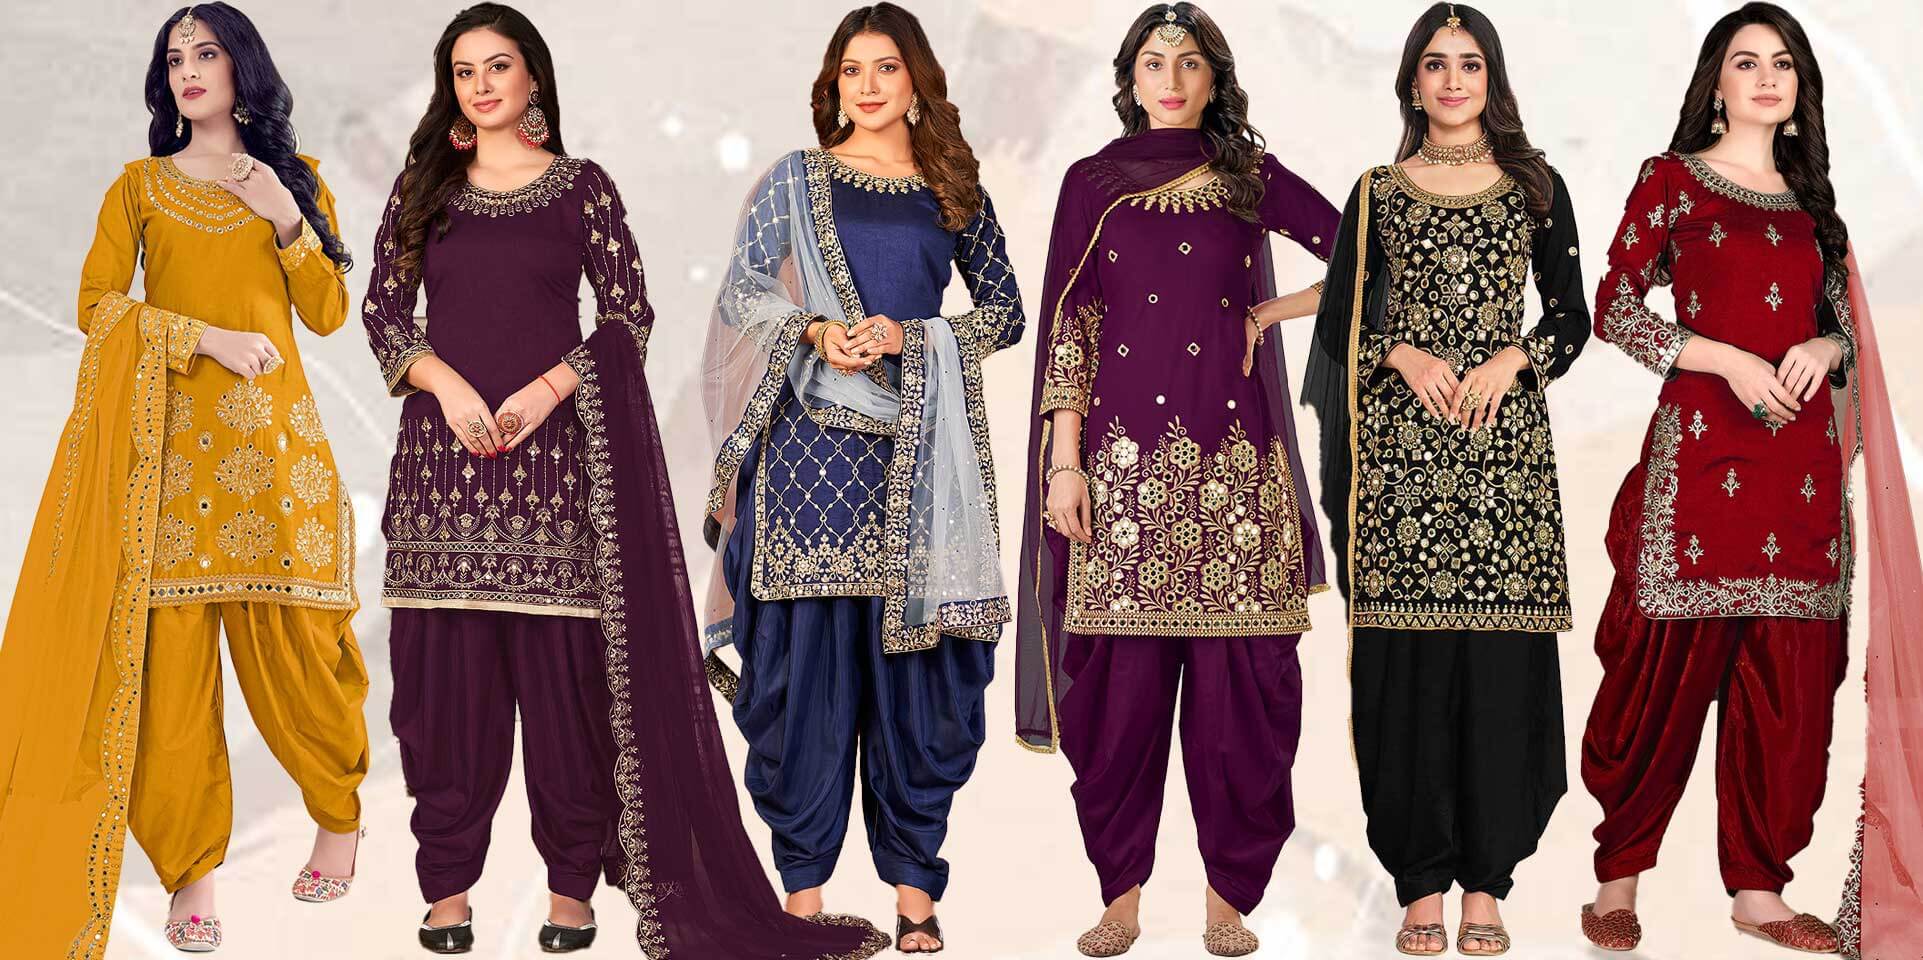 Best Punjabi Suits Shopping Guide in USA, UK, Canada and Worldwide in 2023